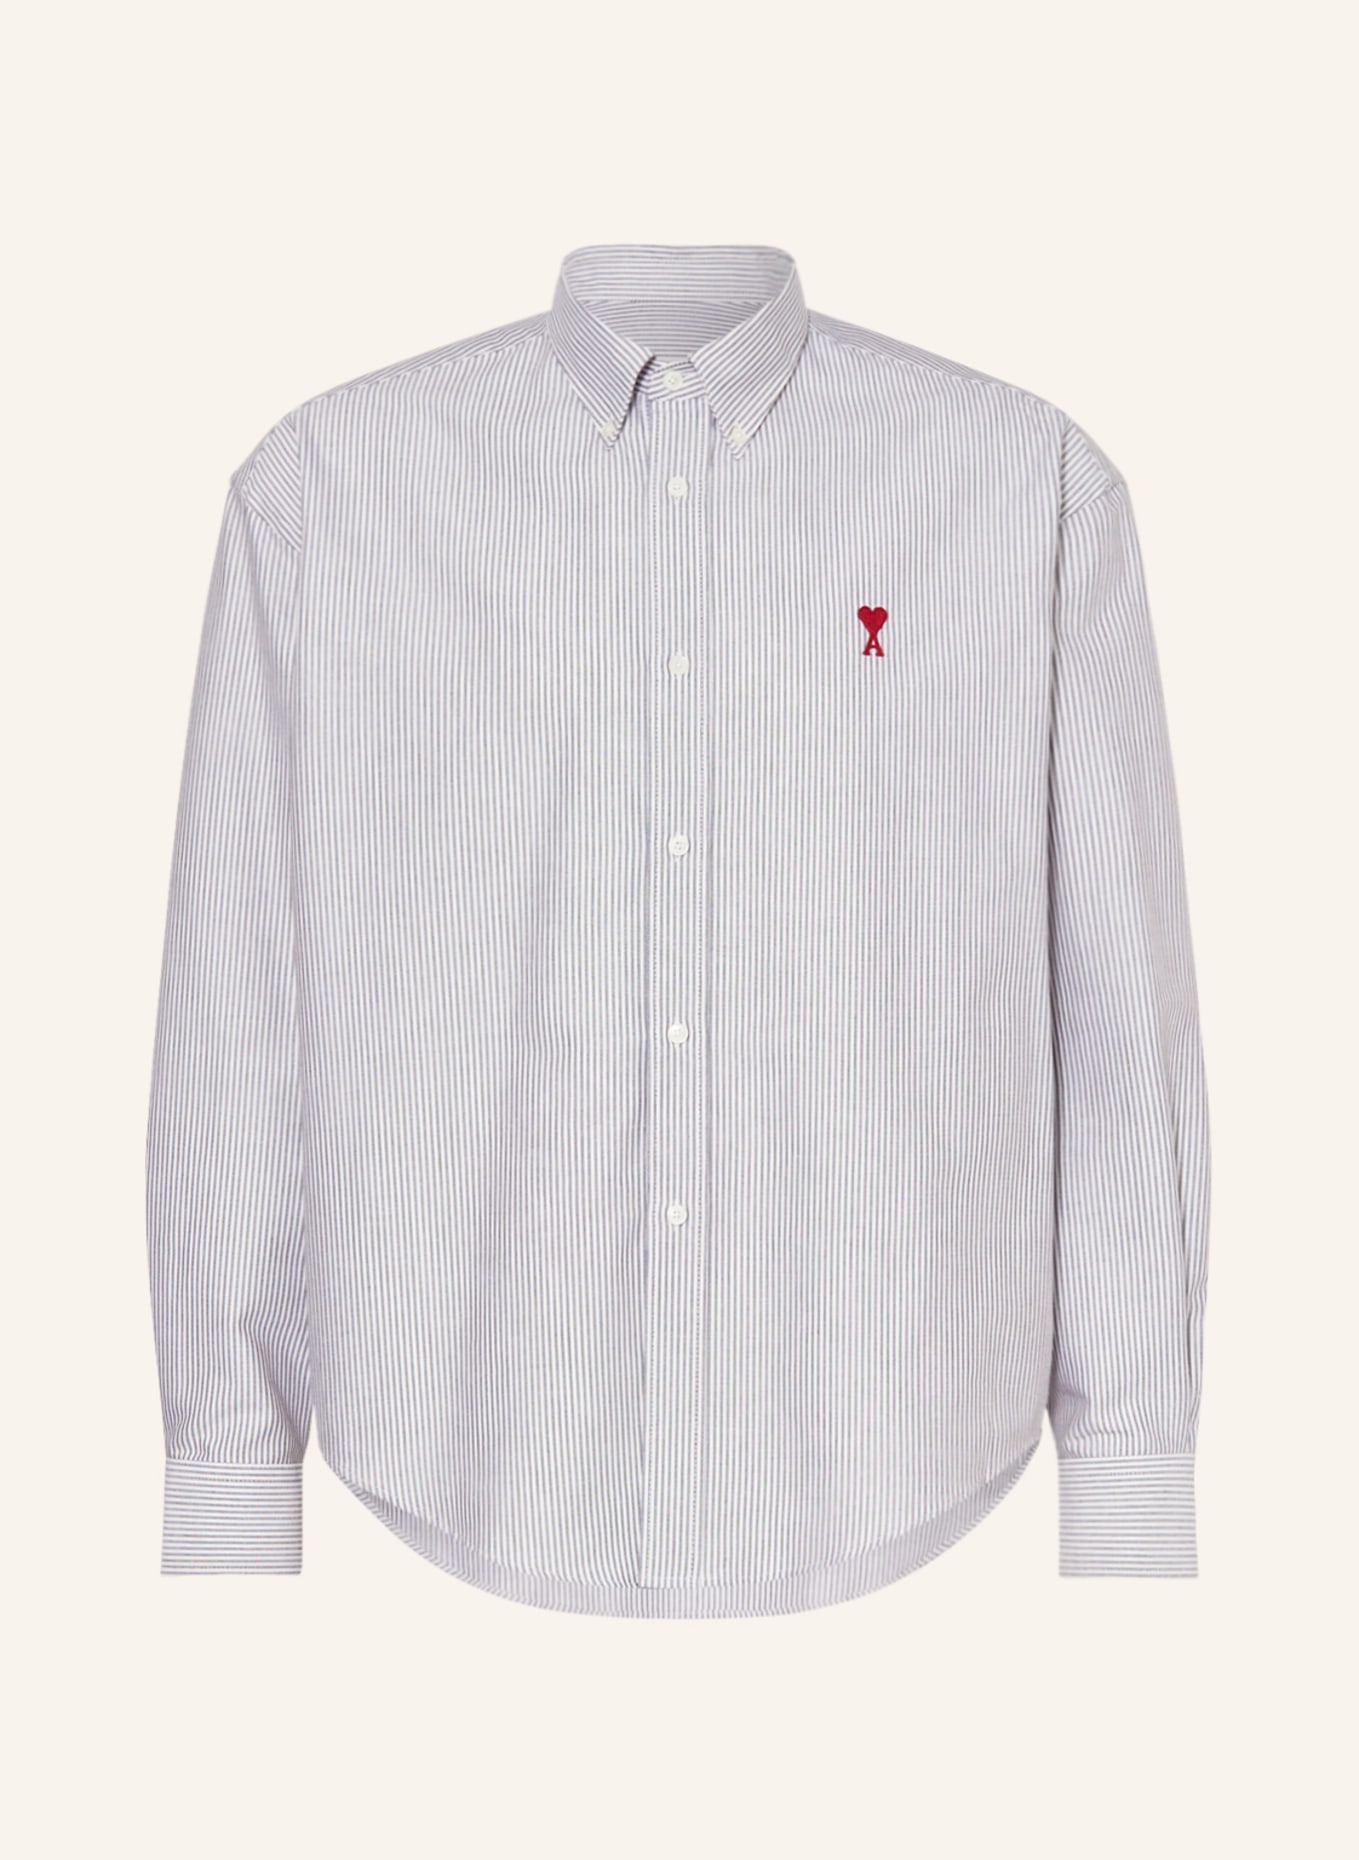 AMI PARIS Shirt comfort fit in gray/ white